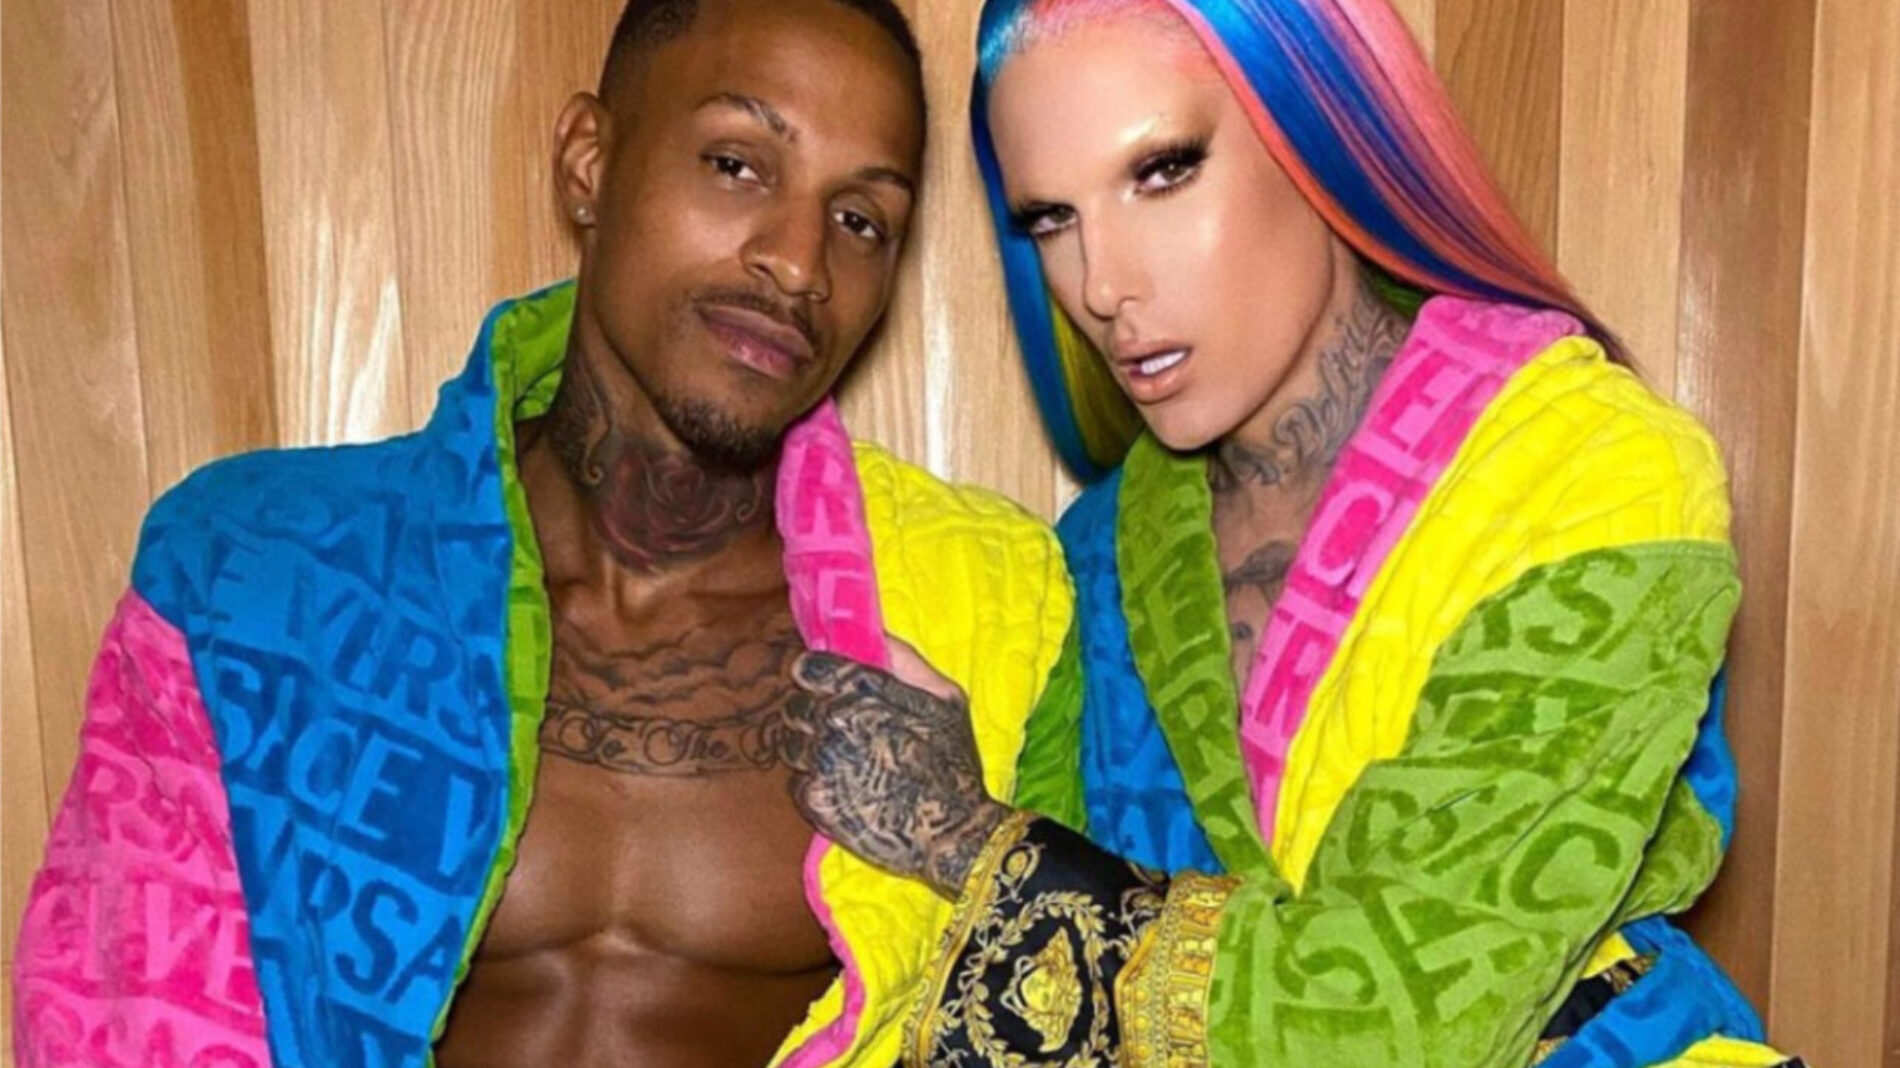 Jeffree Star In A Messy Breakup With Boyfriend Amid Claims Of Stealing